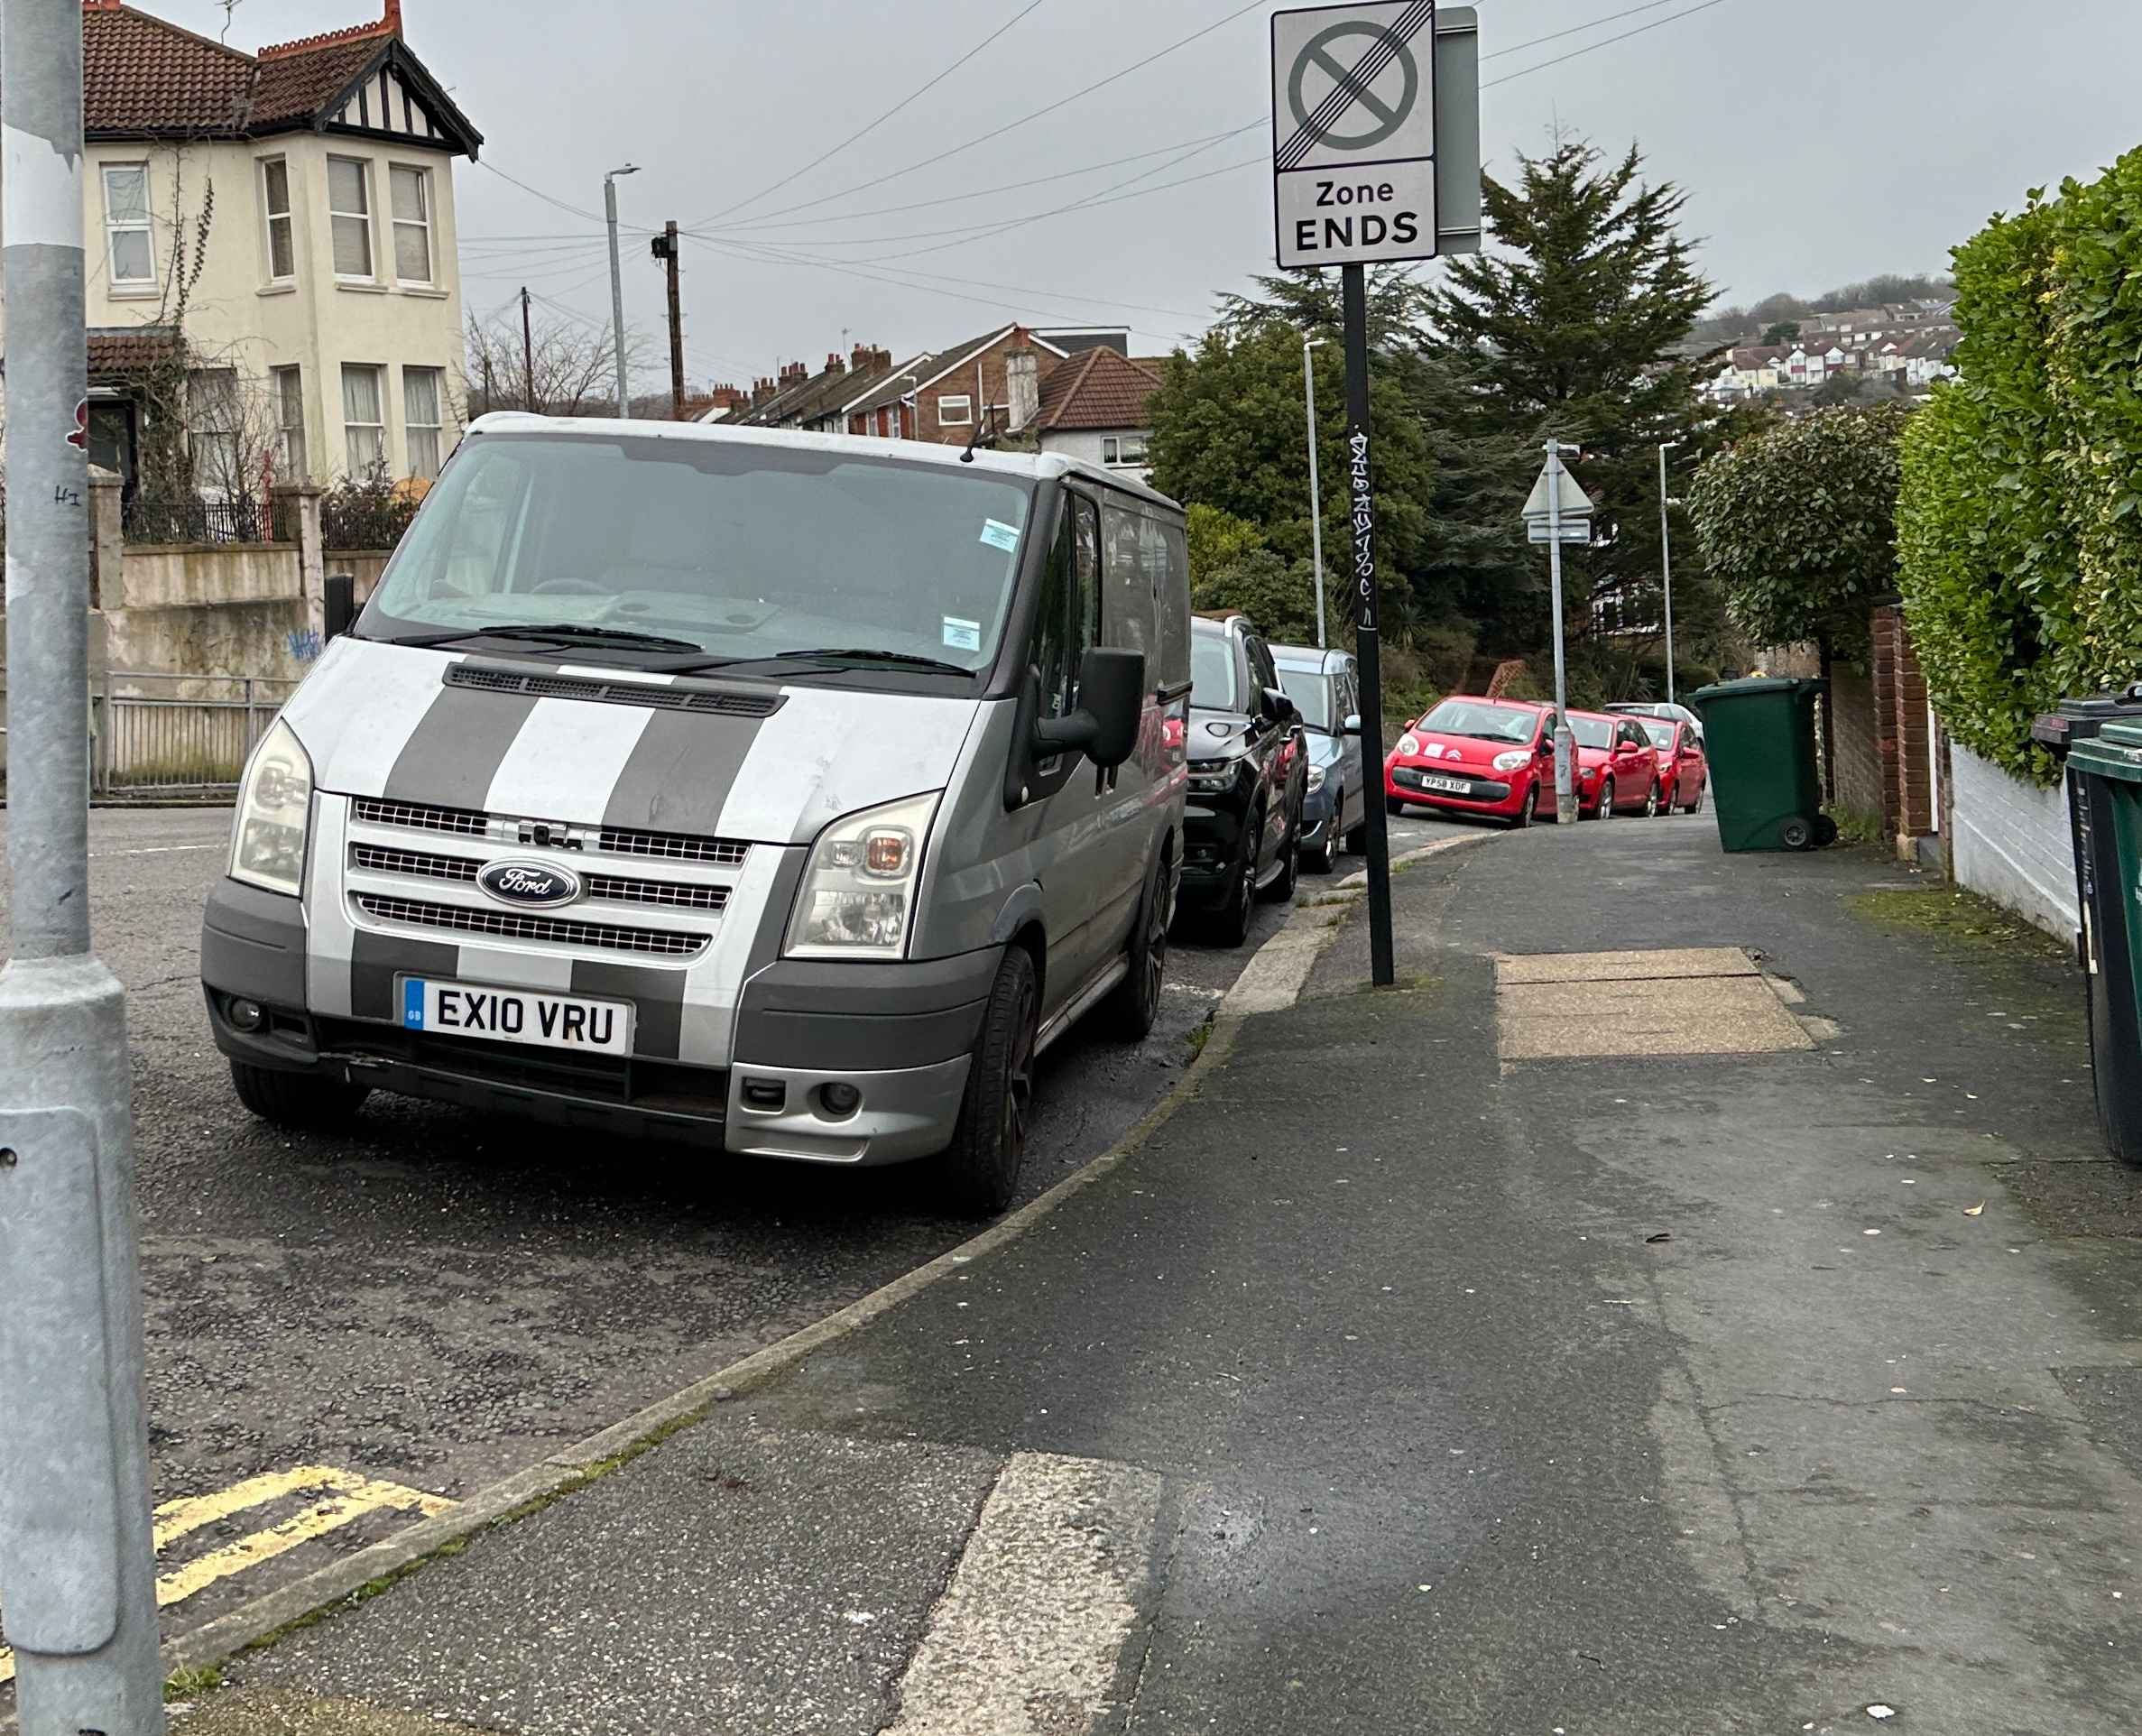 Photograph of EX10 VRU - a Silver Ford Transit parked in Hollingdean by a non-resident. The eighth of ten photographs supplied by the residents of Hollingdean.